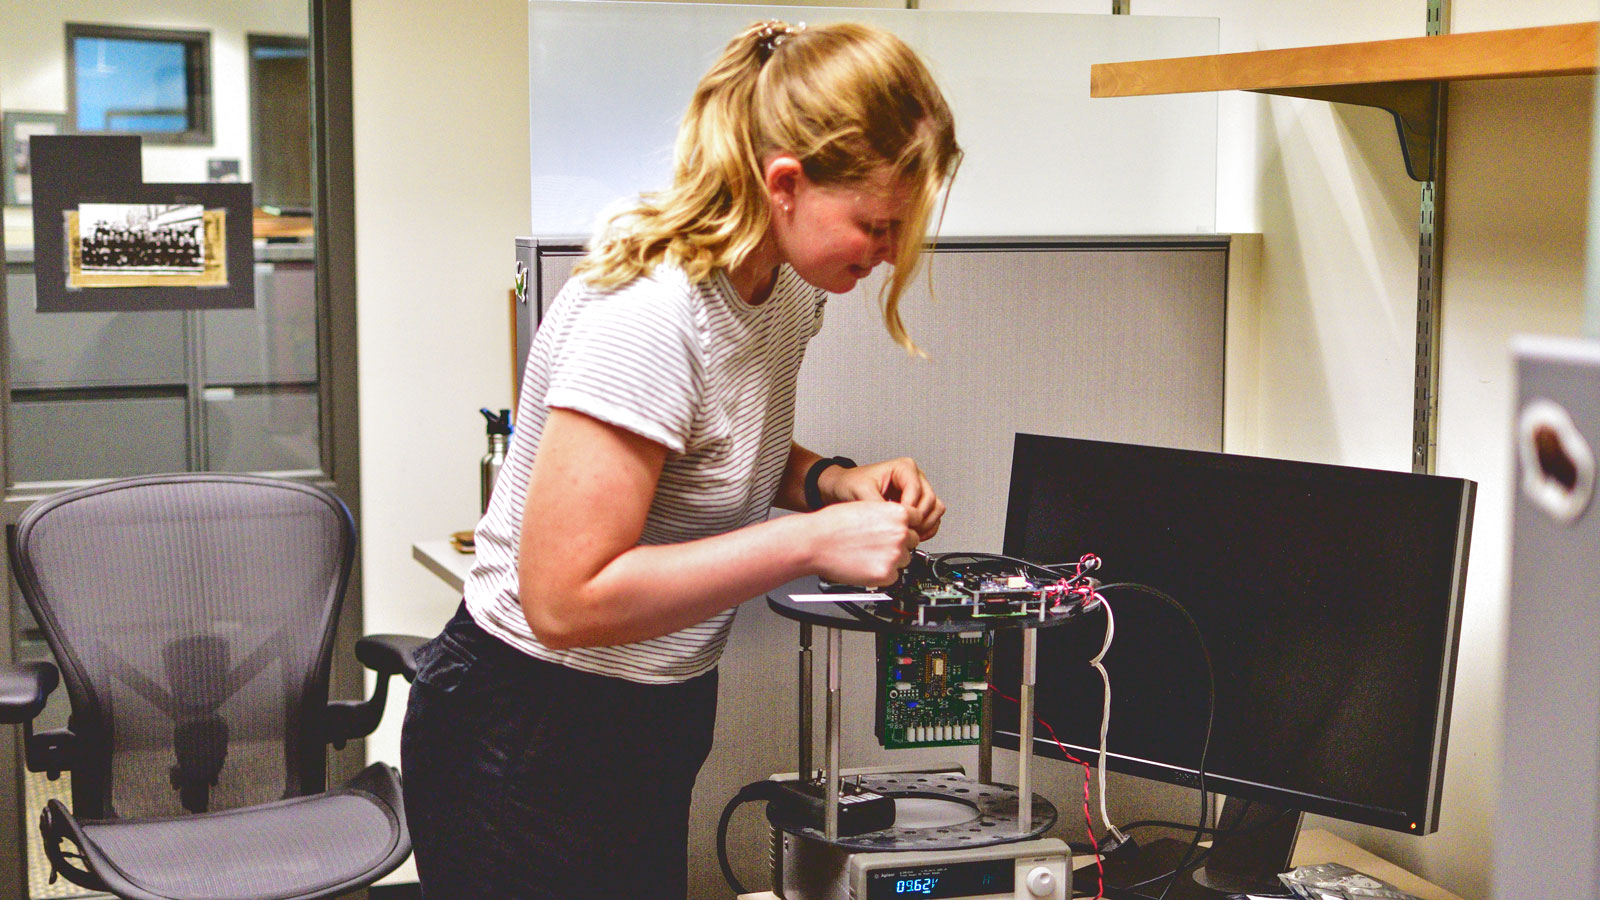 A woman in an office building audio recording hardware.